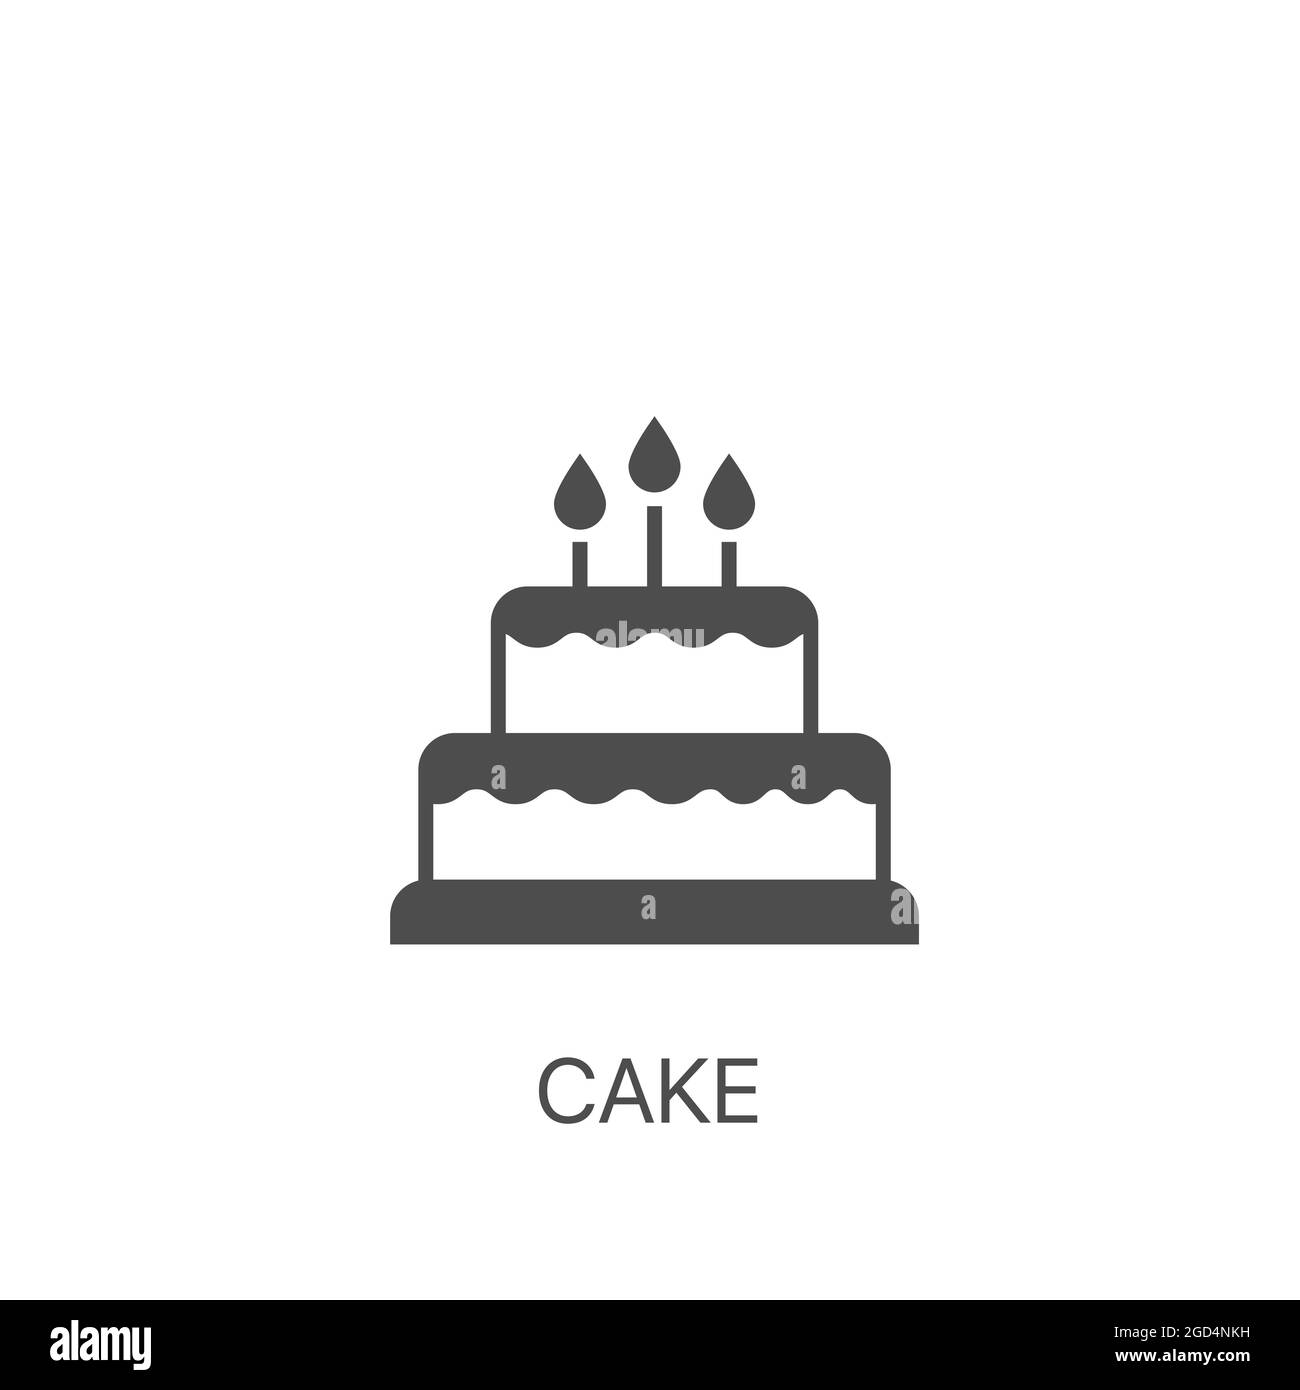 Cake vector icon. Cake for birthday celebration with three candles Stock Vector